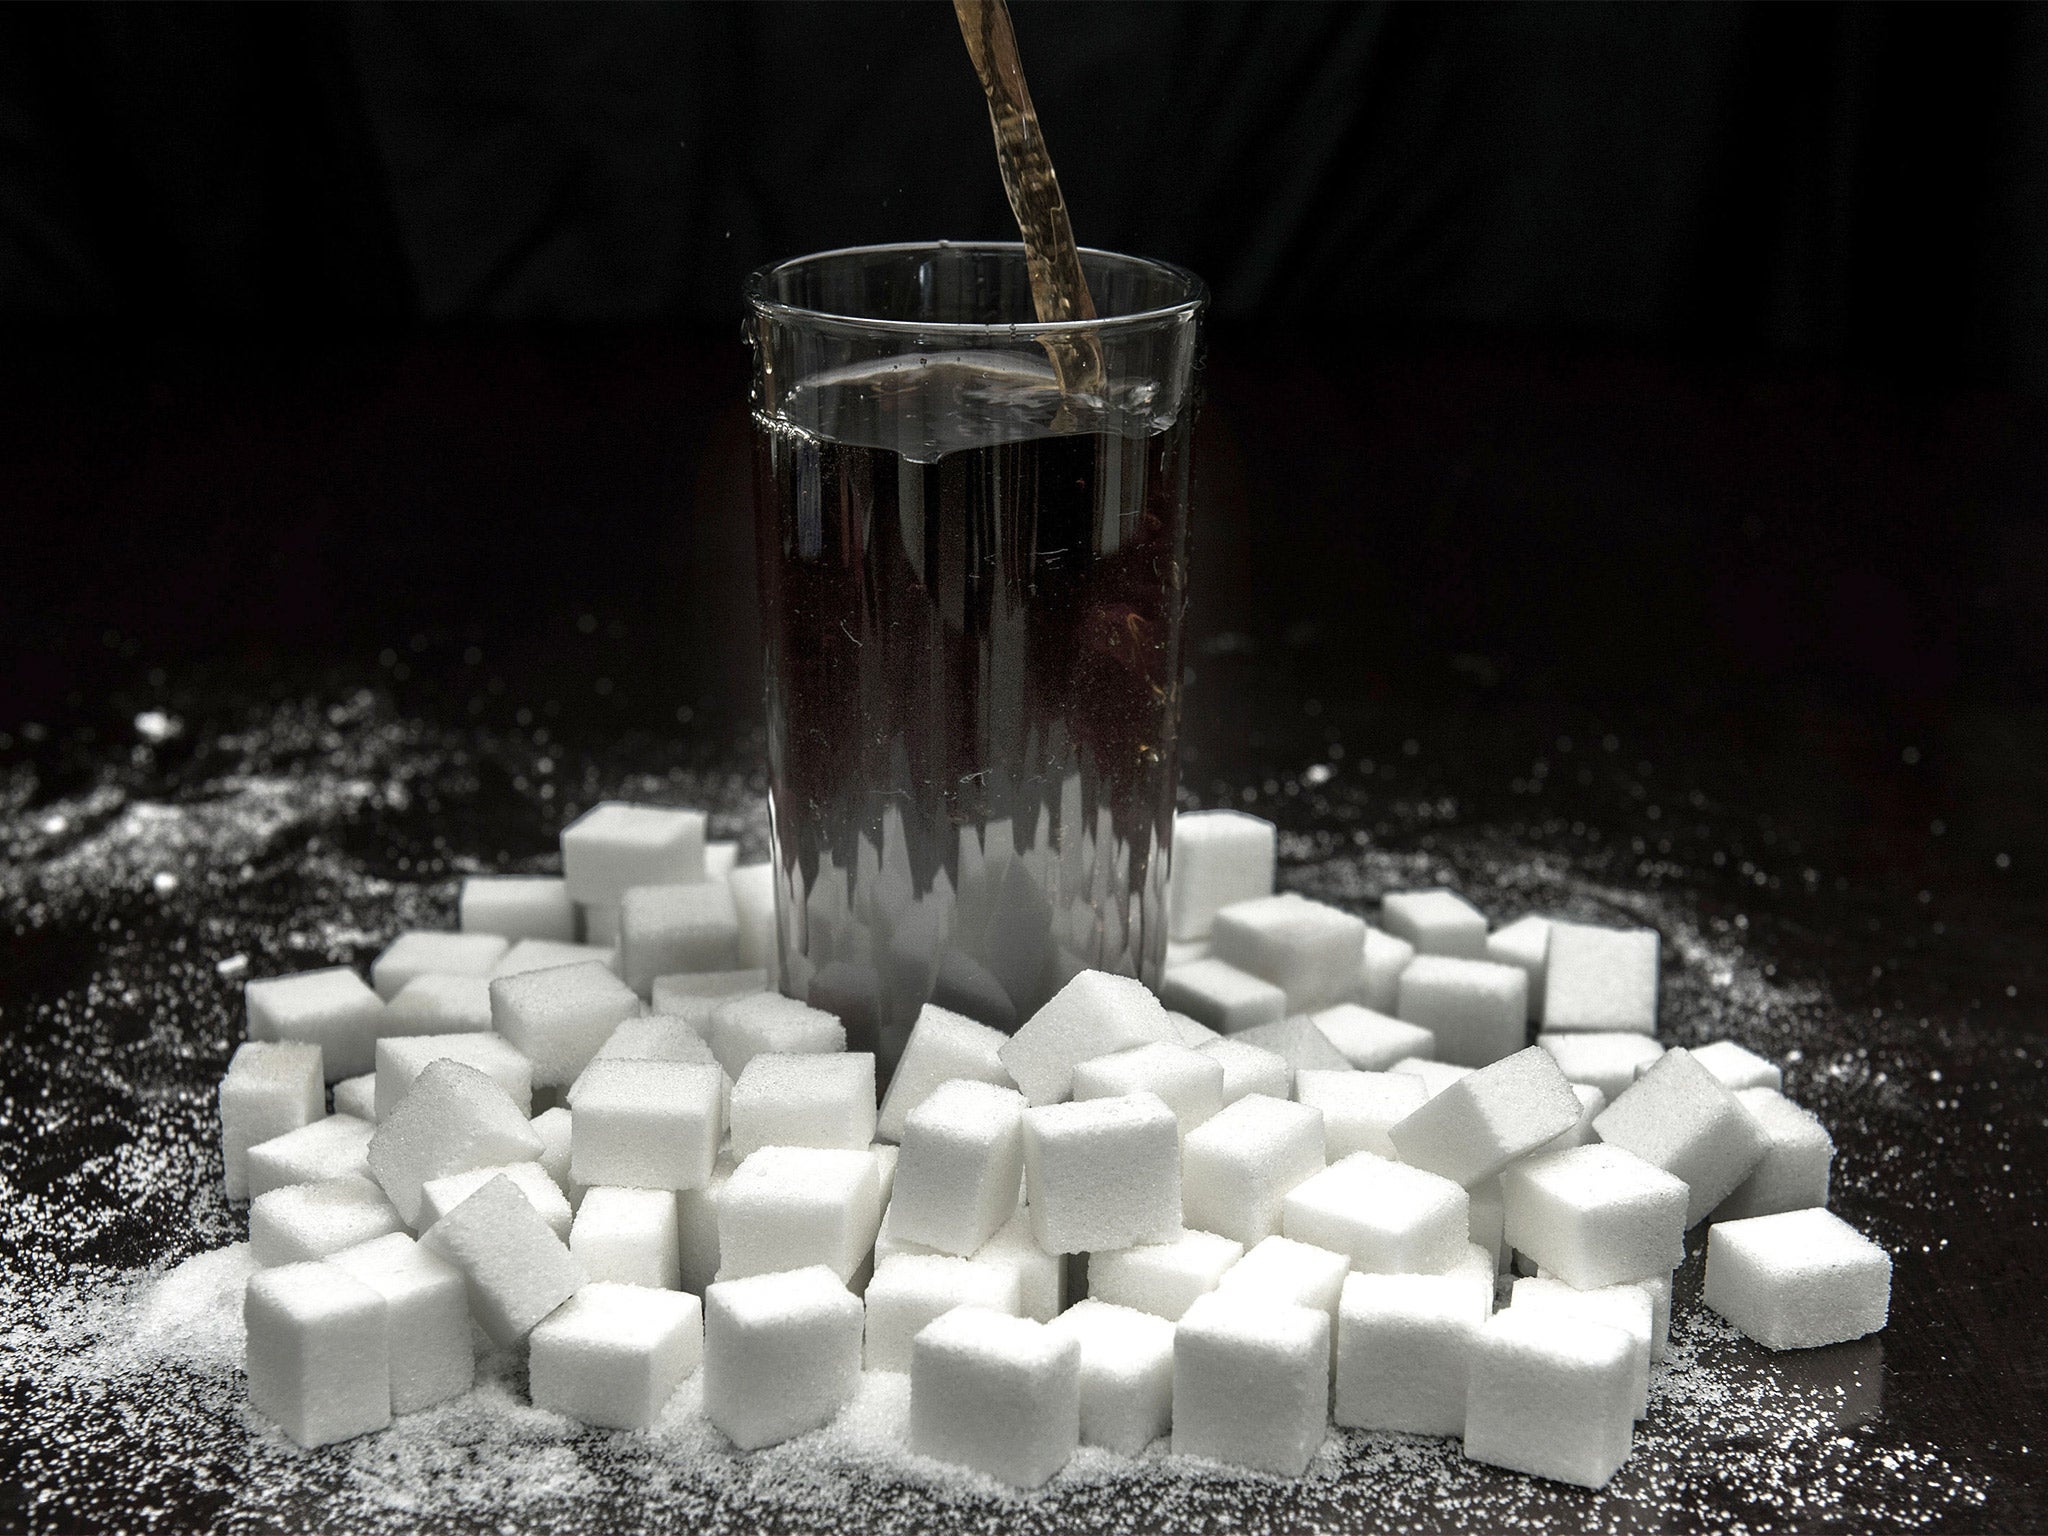 The price of sugar in Europe has fallen by over 40% in the last three years